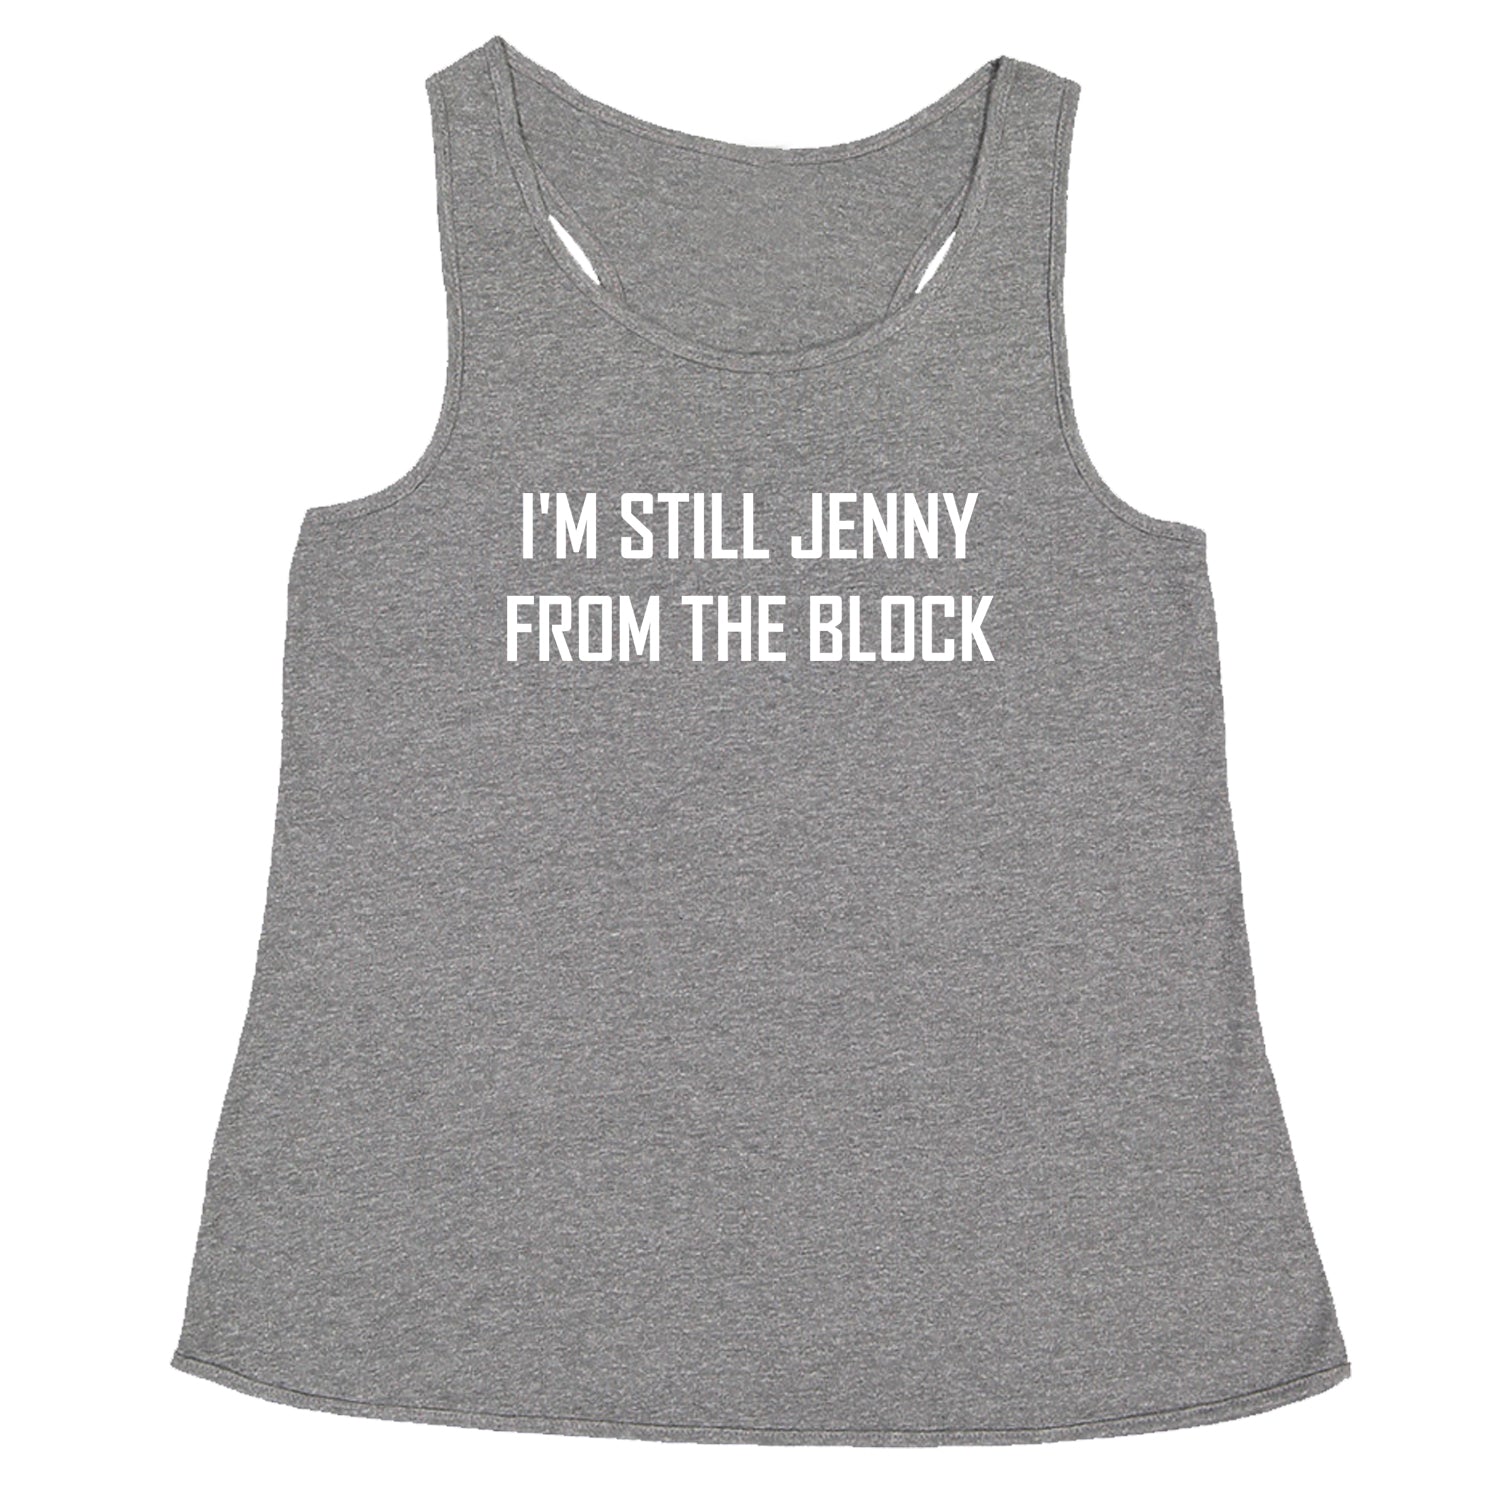 I'm Still Jenny From The Block Racerback Tank Top for Women concert, jennifer, lopez, merch, tour by Expression Tees